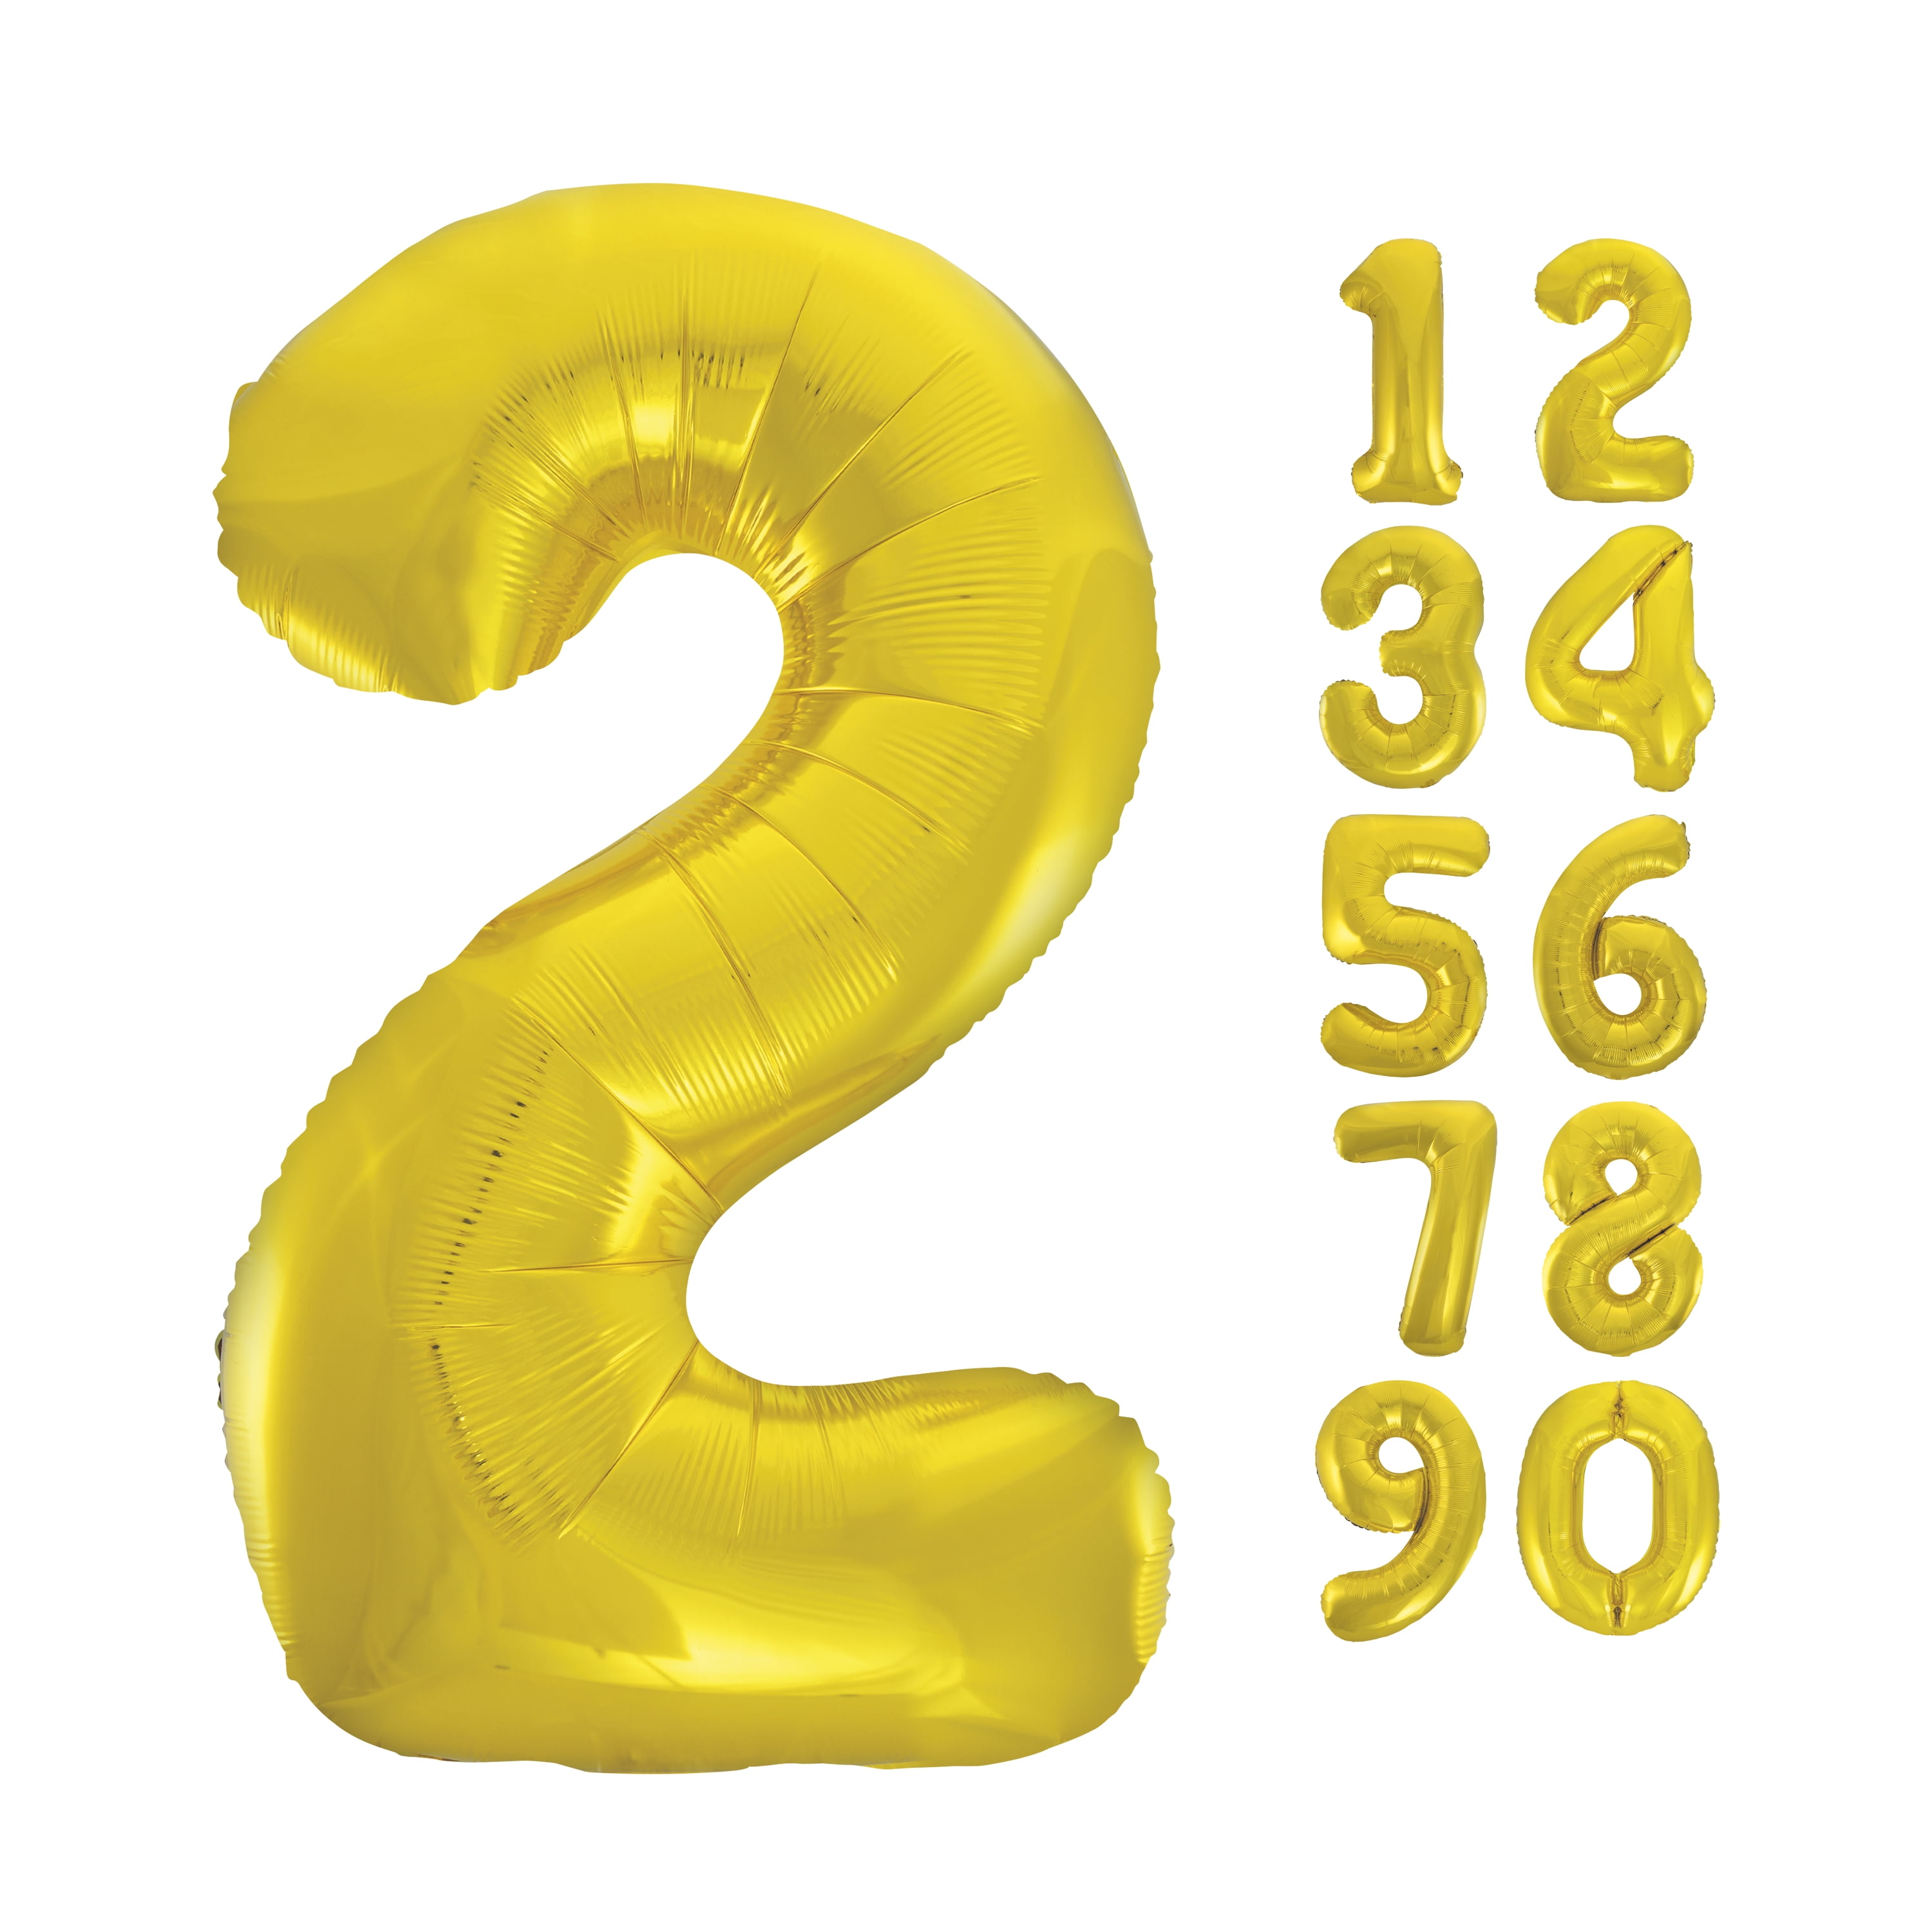 numbers on balloons